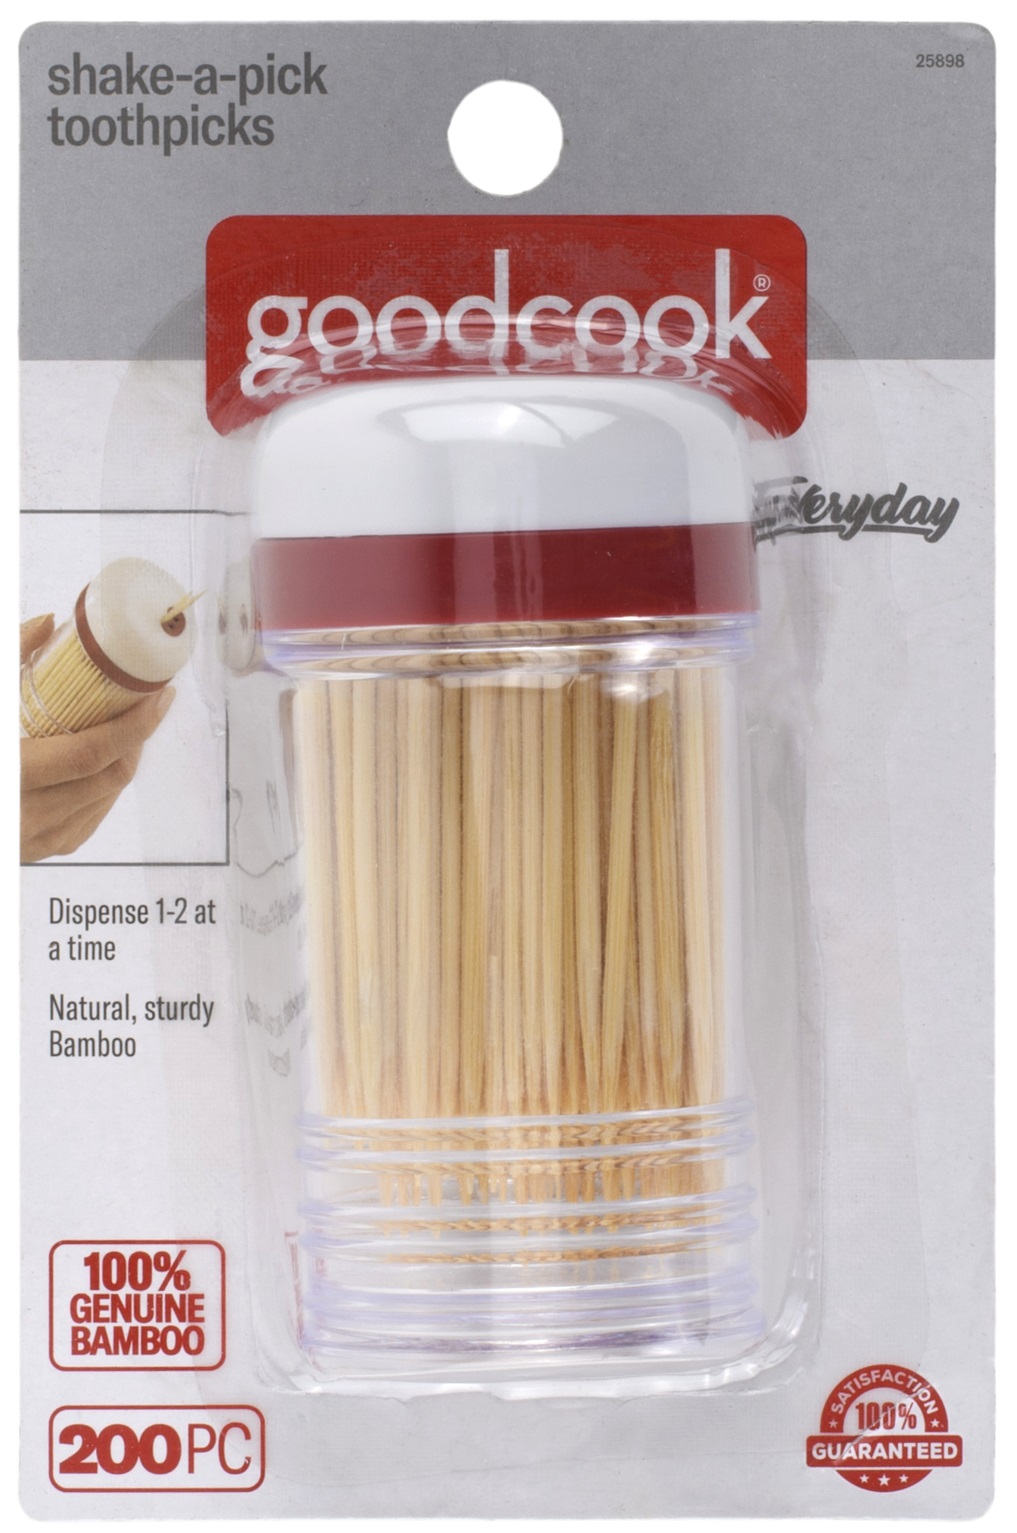 25898_GoodCook_Everyday_Toothpick Dispenser 200 Ct_Packaging 1.psd